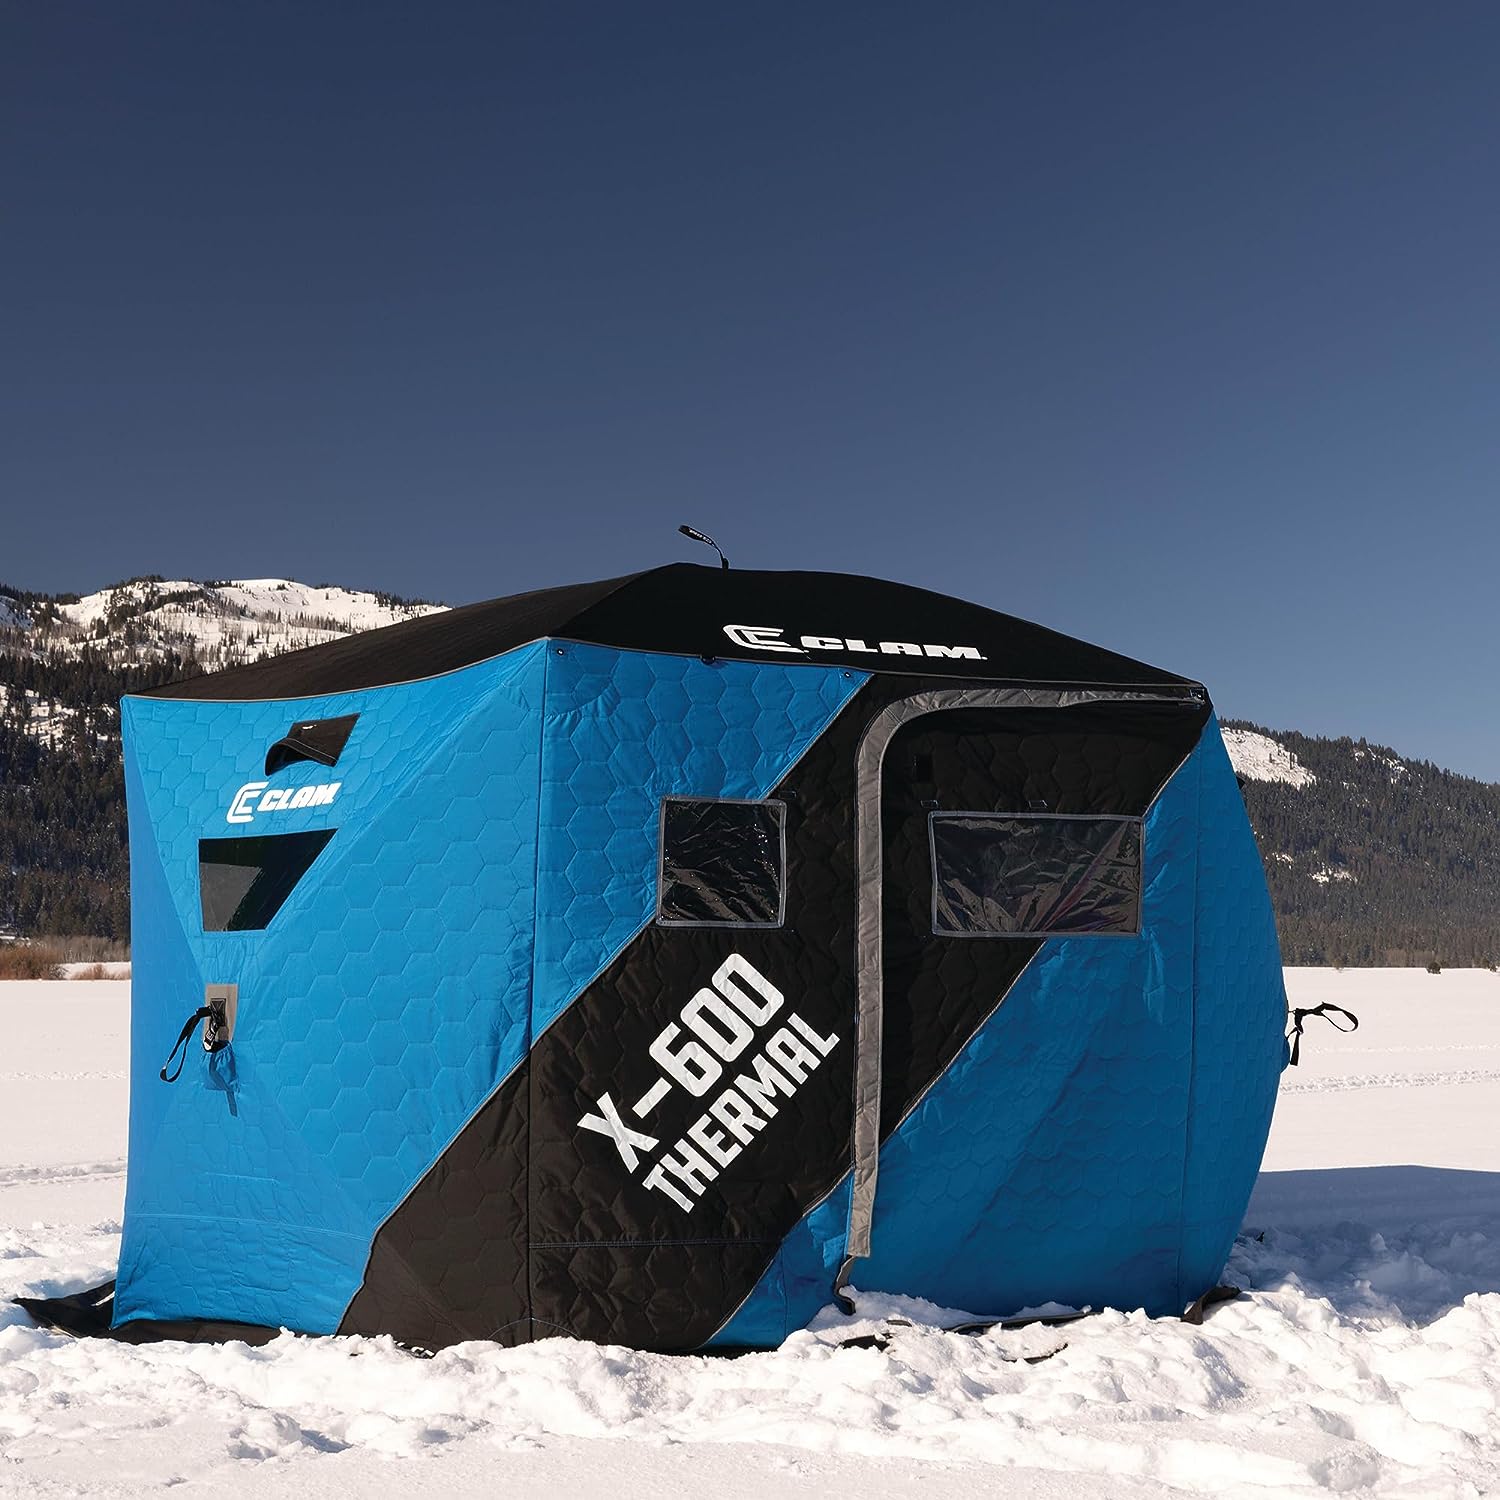 CLAM X-600 Portable 11.5 Ft 6 Person Pop Up Ice Fishing Thermal Hub Shelter Tent-117481